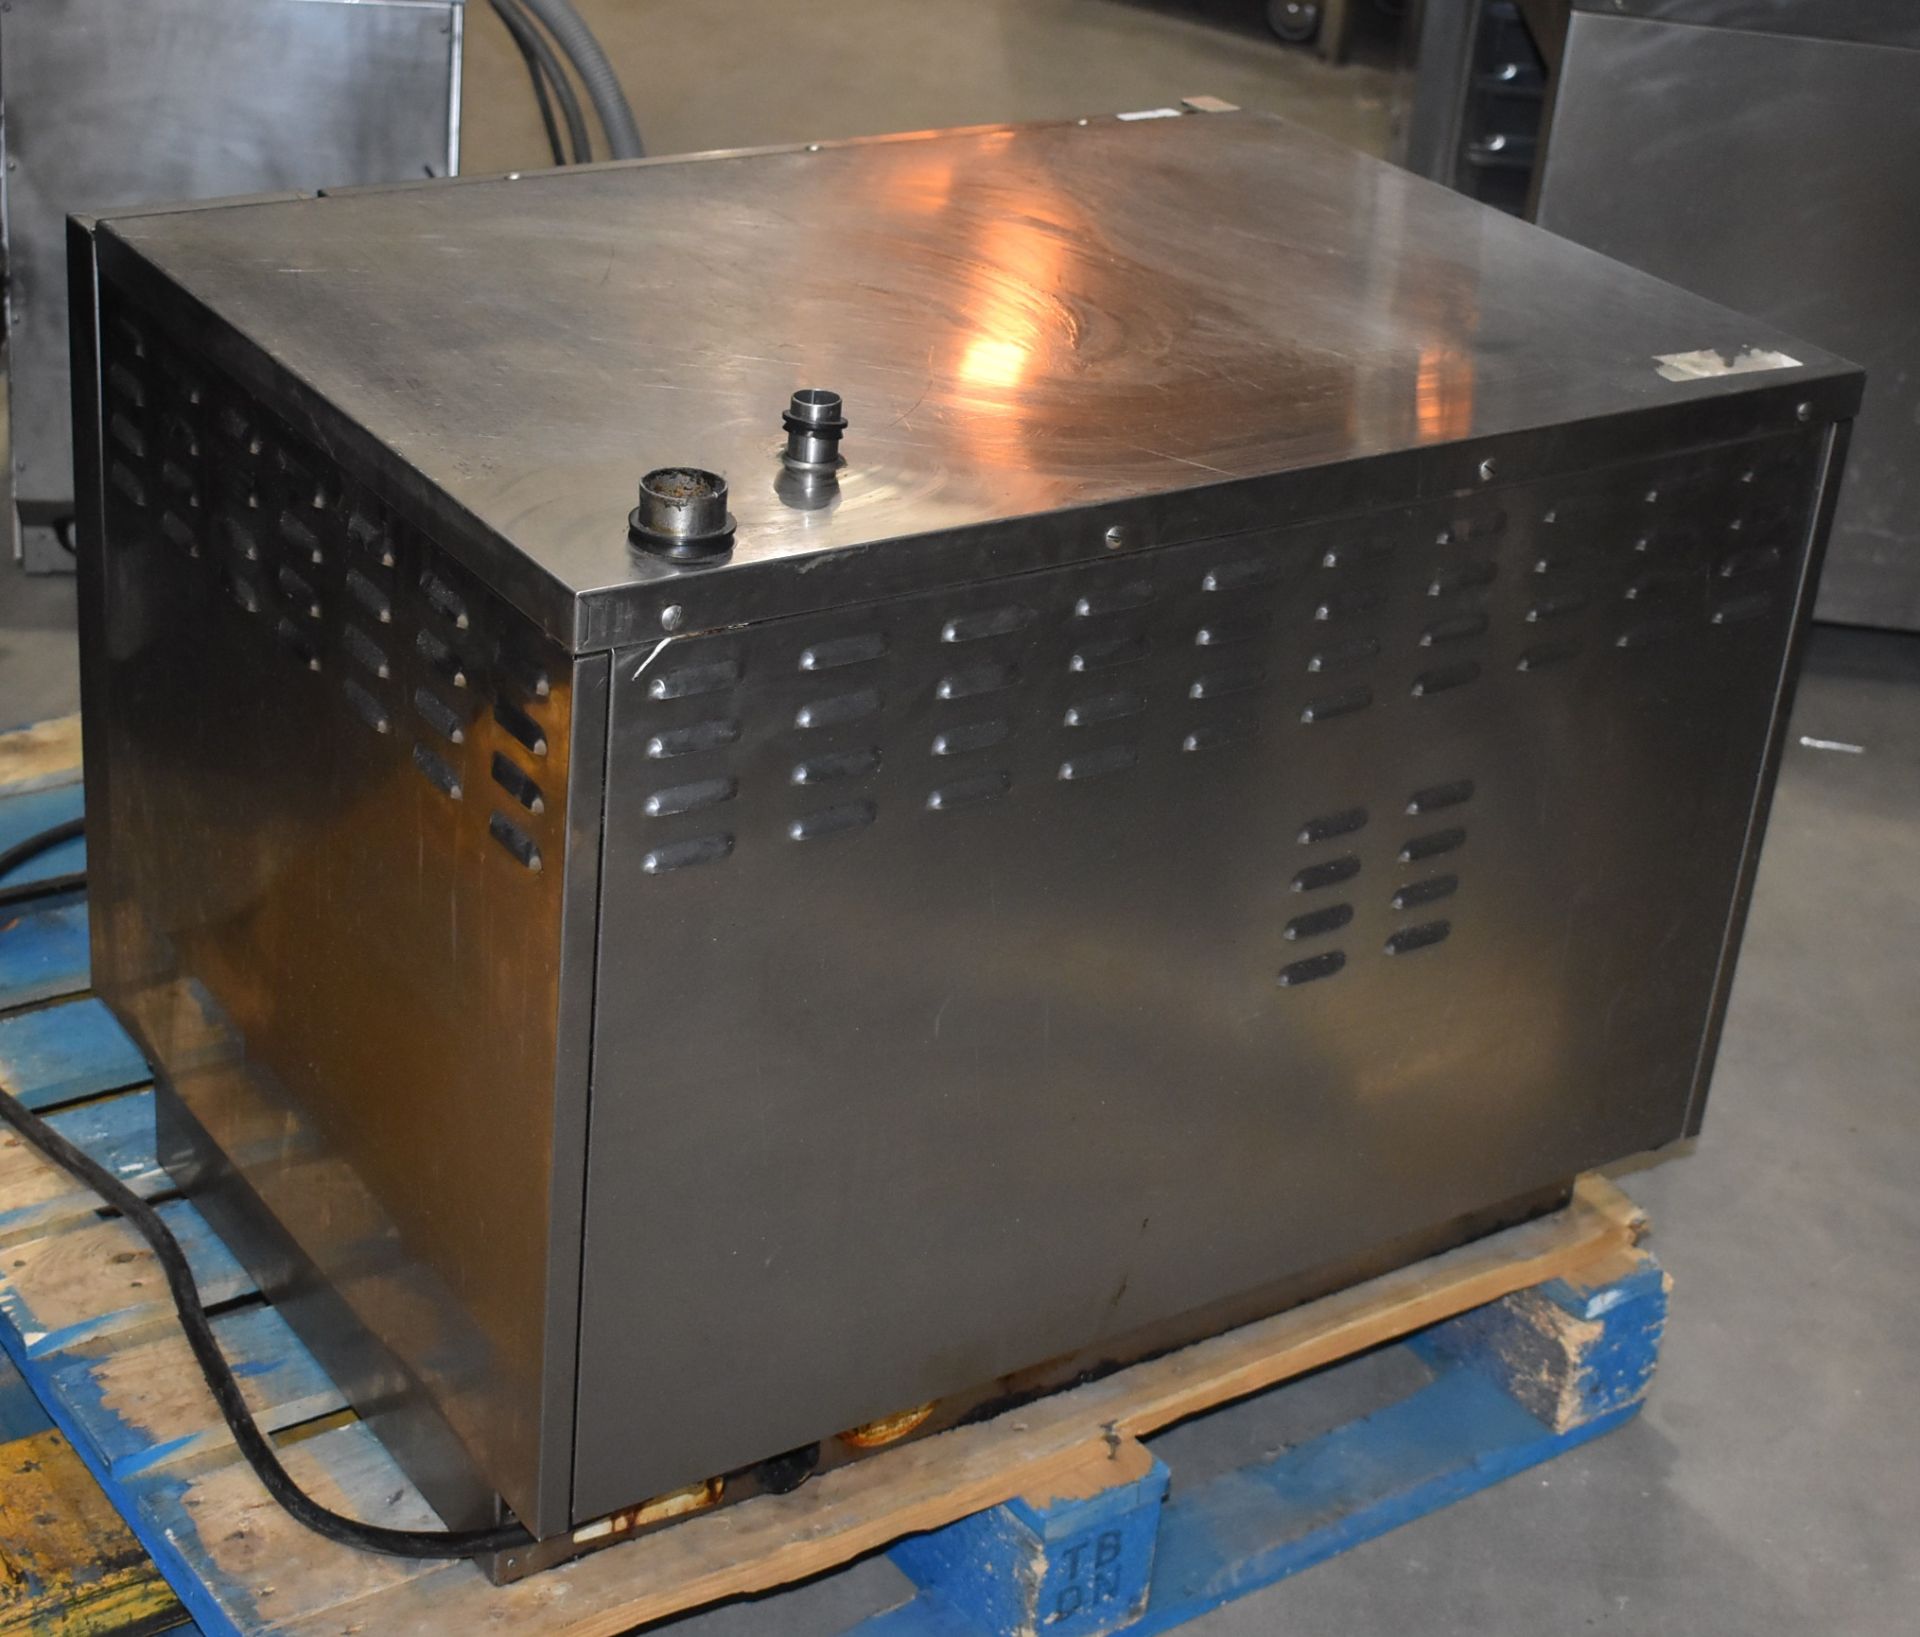 1 x Lainox MCE051M Commercial Electric 400v Convection Oven With Stainless Steel Exterior - Recently - Image 2 of 9